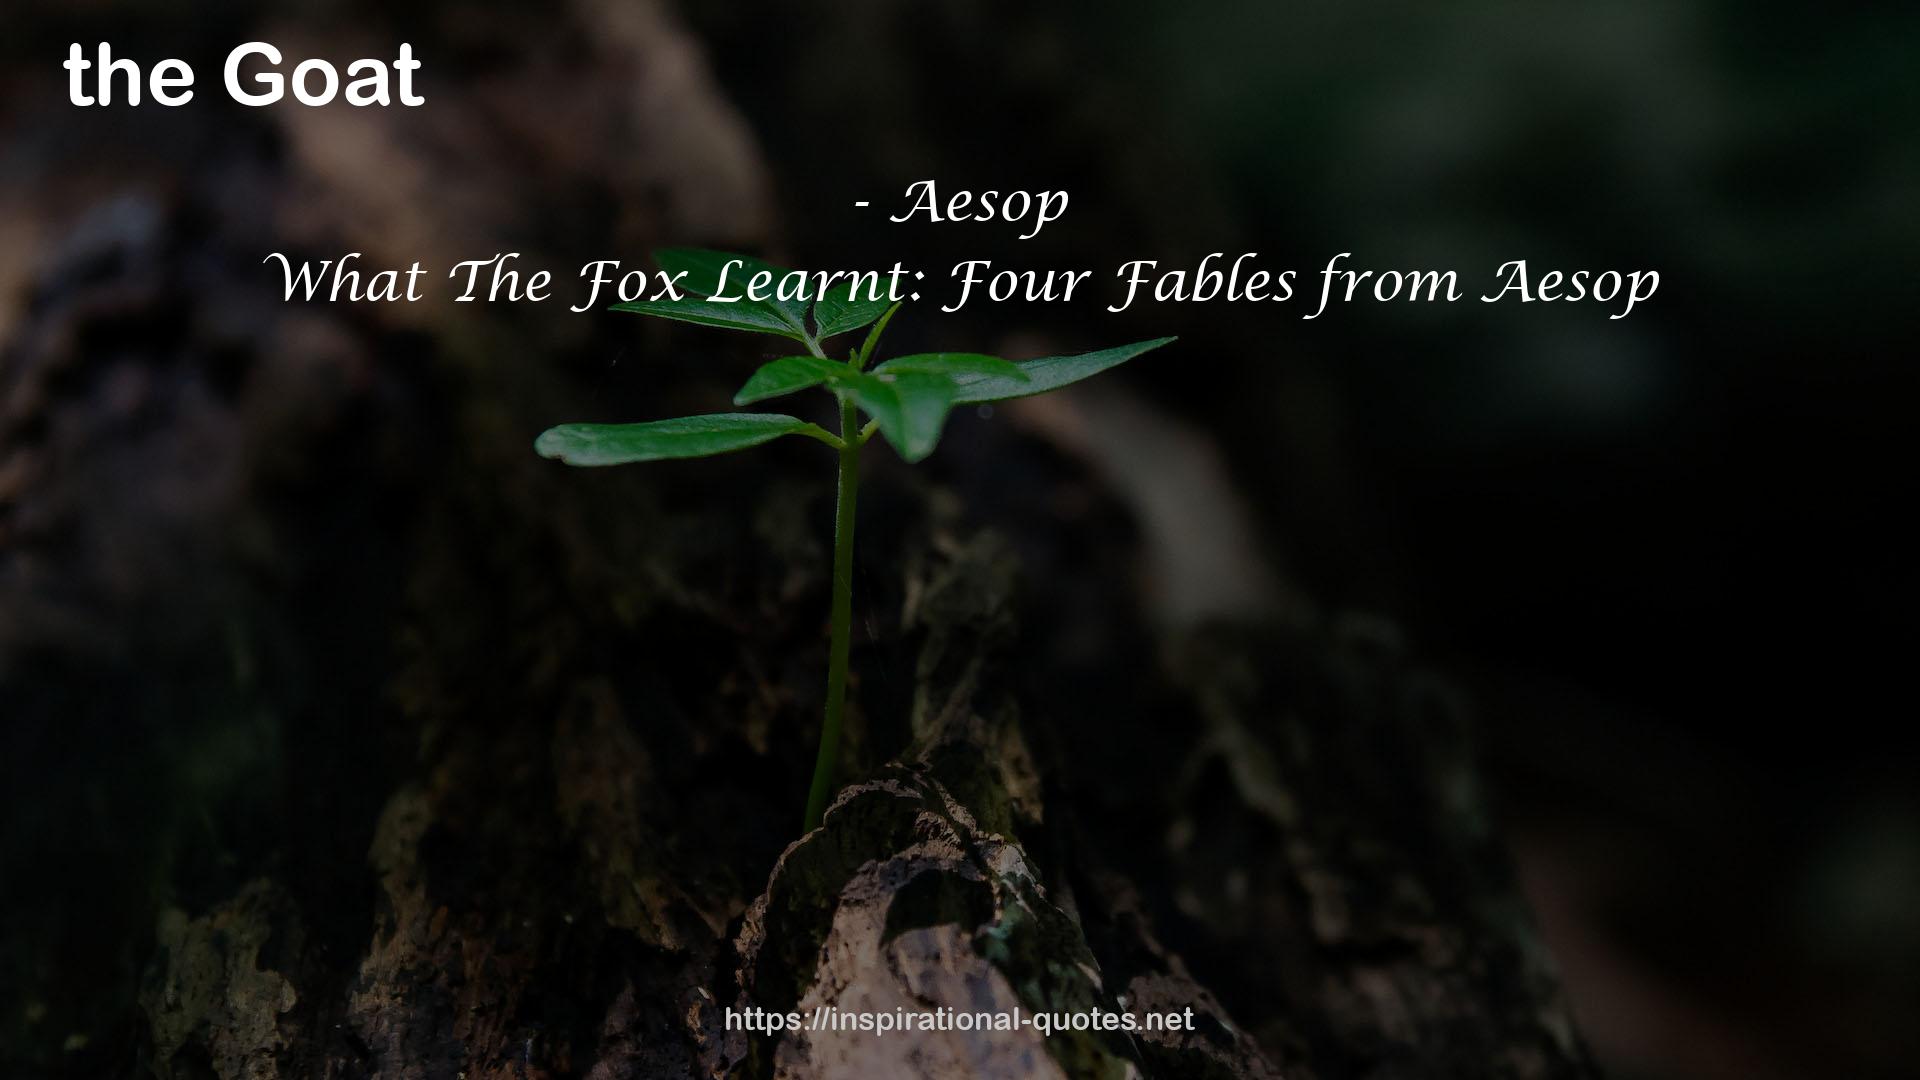 What The Fox Learnt: Four Fables from Aesop QUOTES